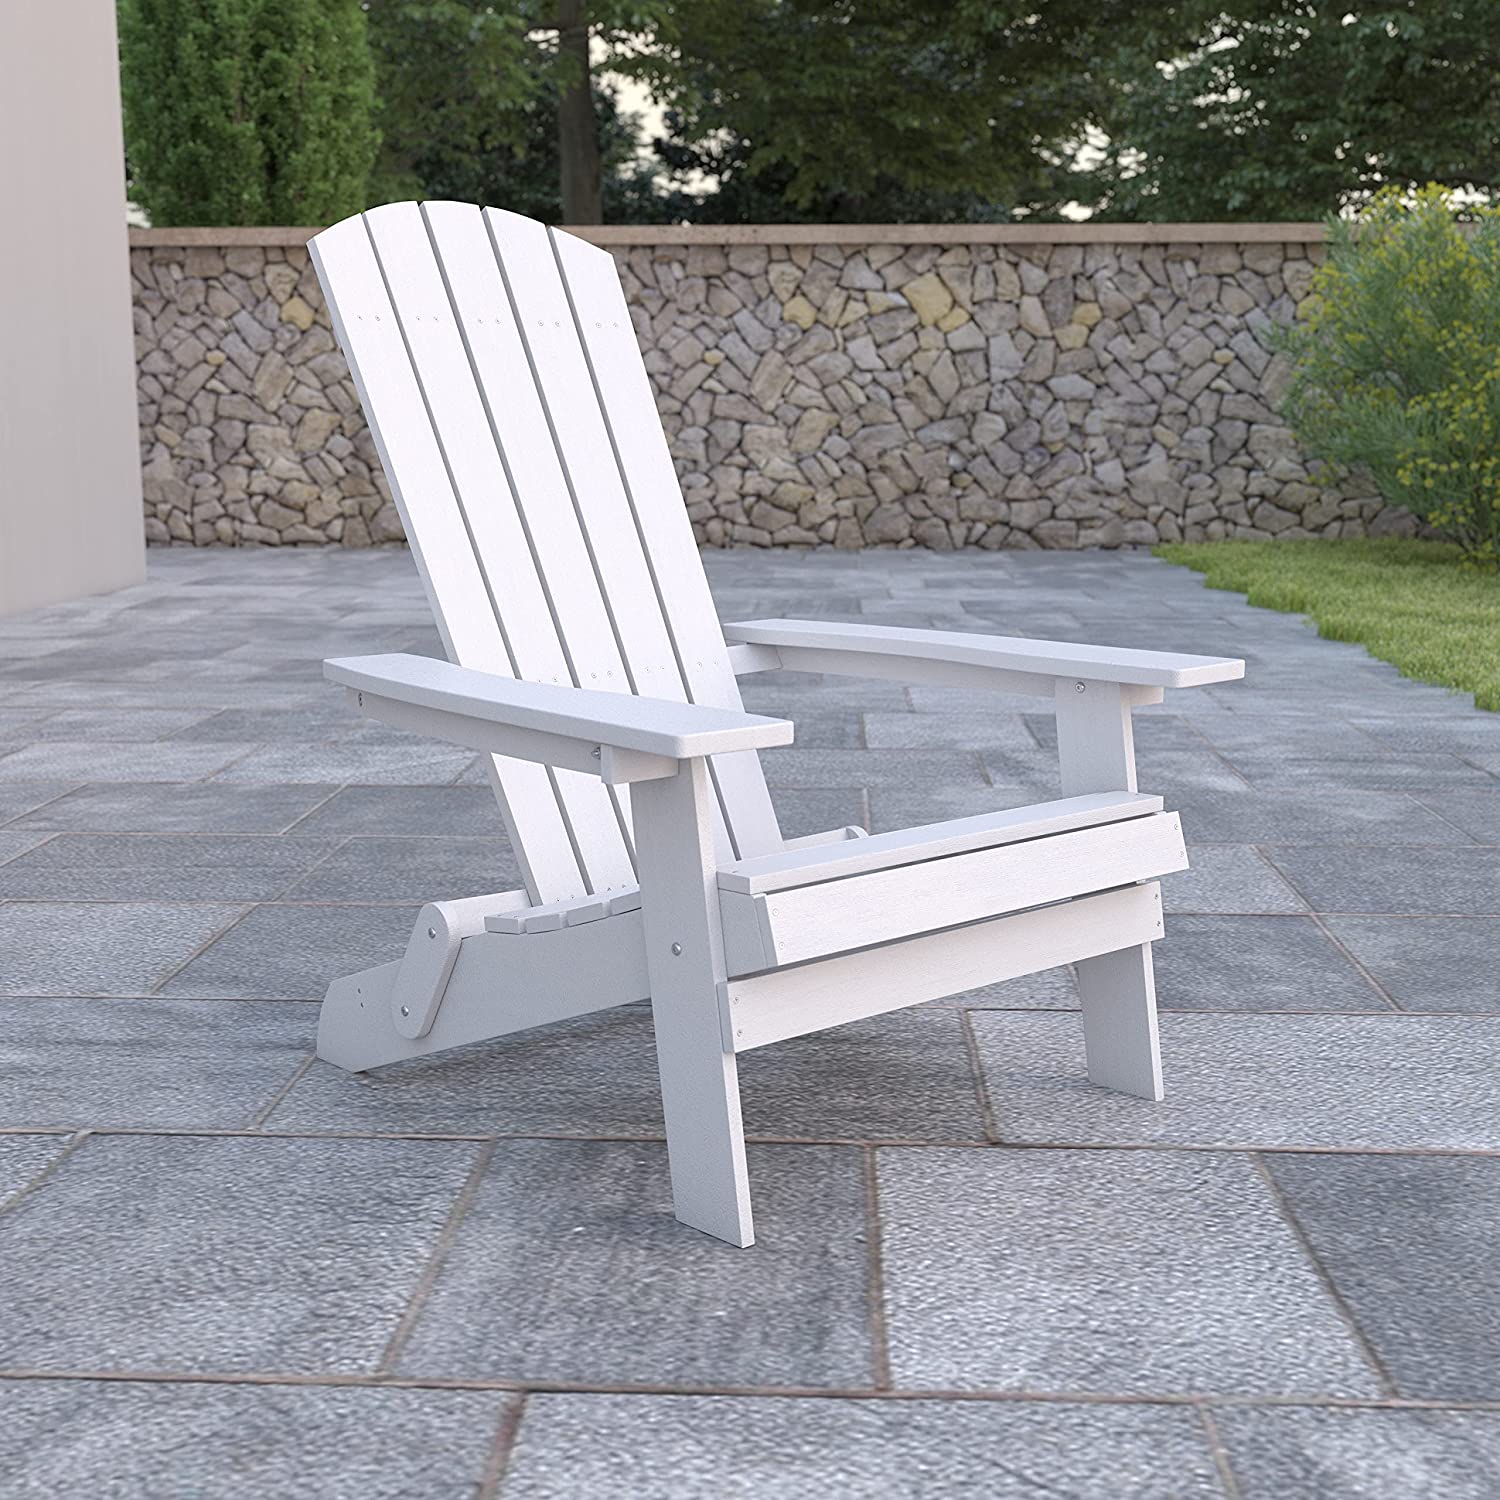 Flash Furniture Charlestown Folding Adirondack Chair - White - Poly Resin - Indoor/Outdoor - Weather Resistant